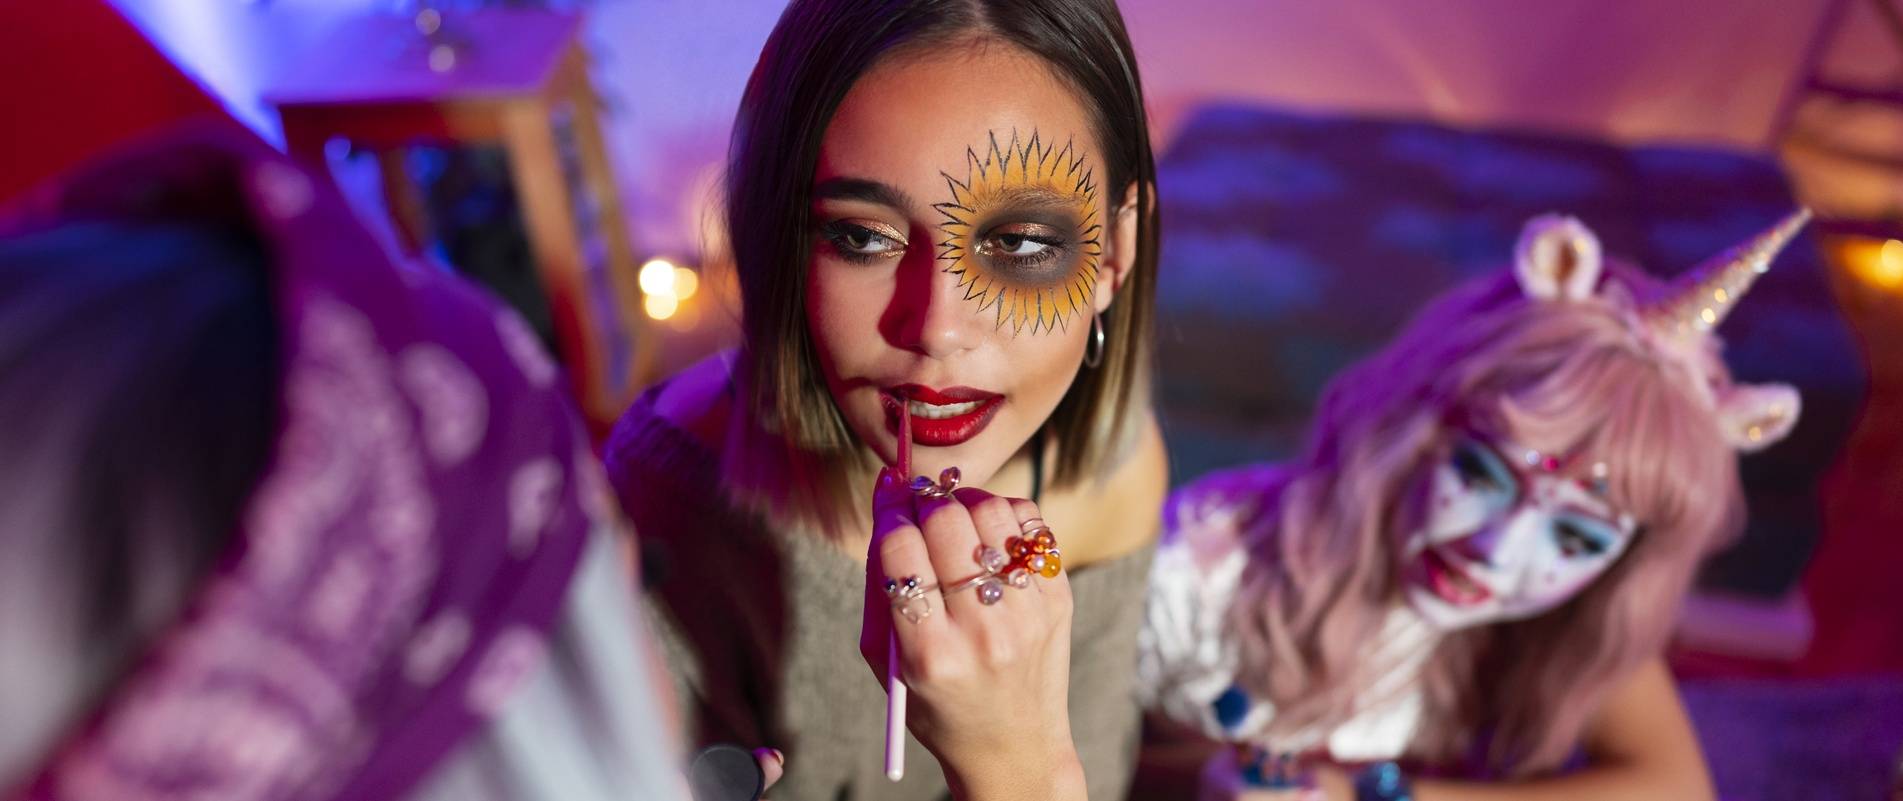 Halloween Makeup Looks That Don't Require a Costume